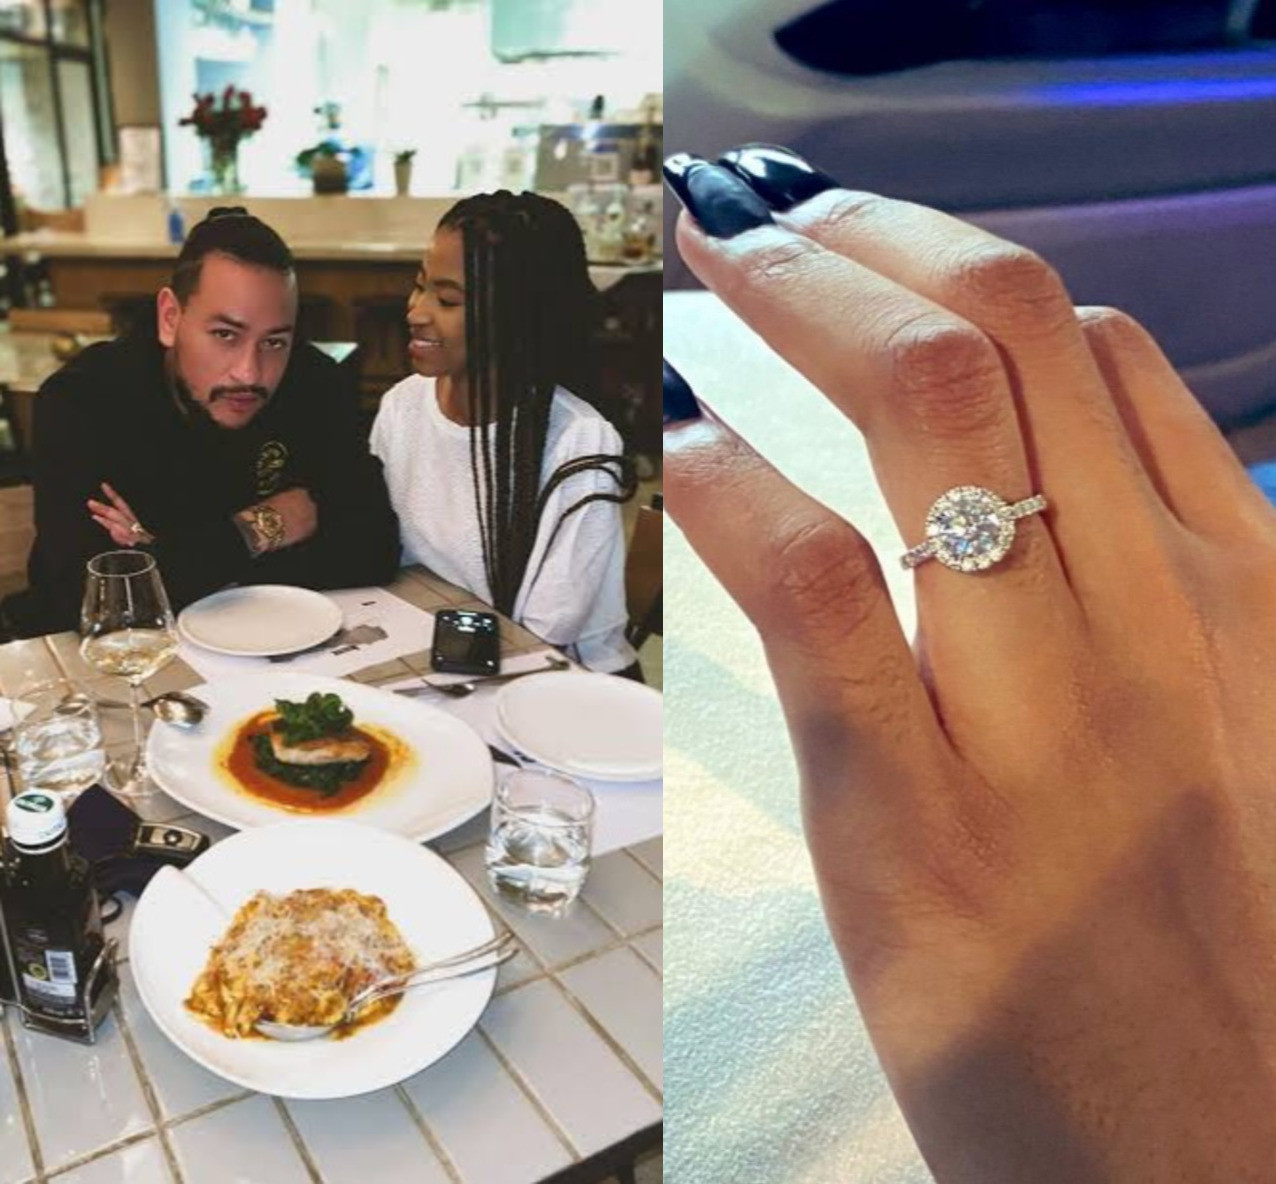 SA Rapper AKA engaged to Nelli Tembe; shares photos of her engagement ring